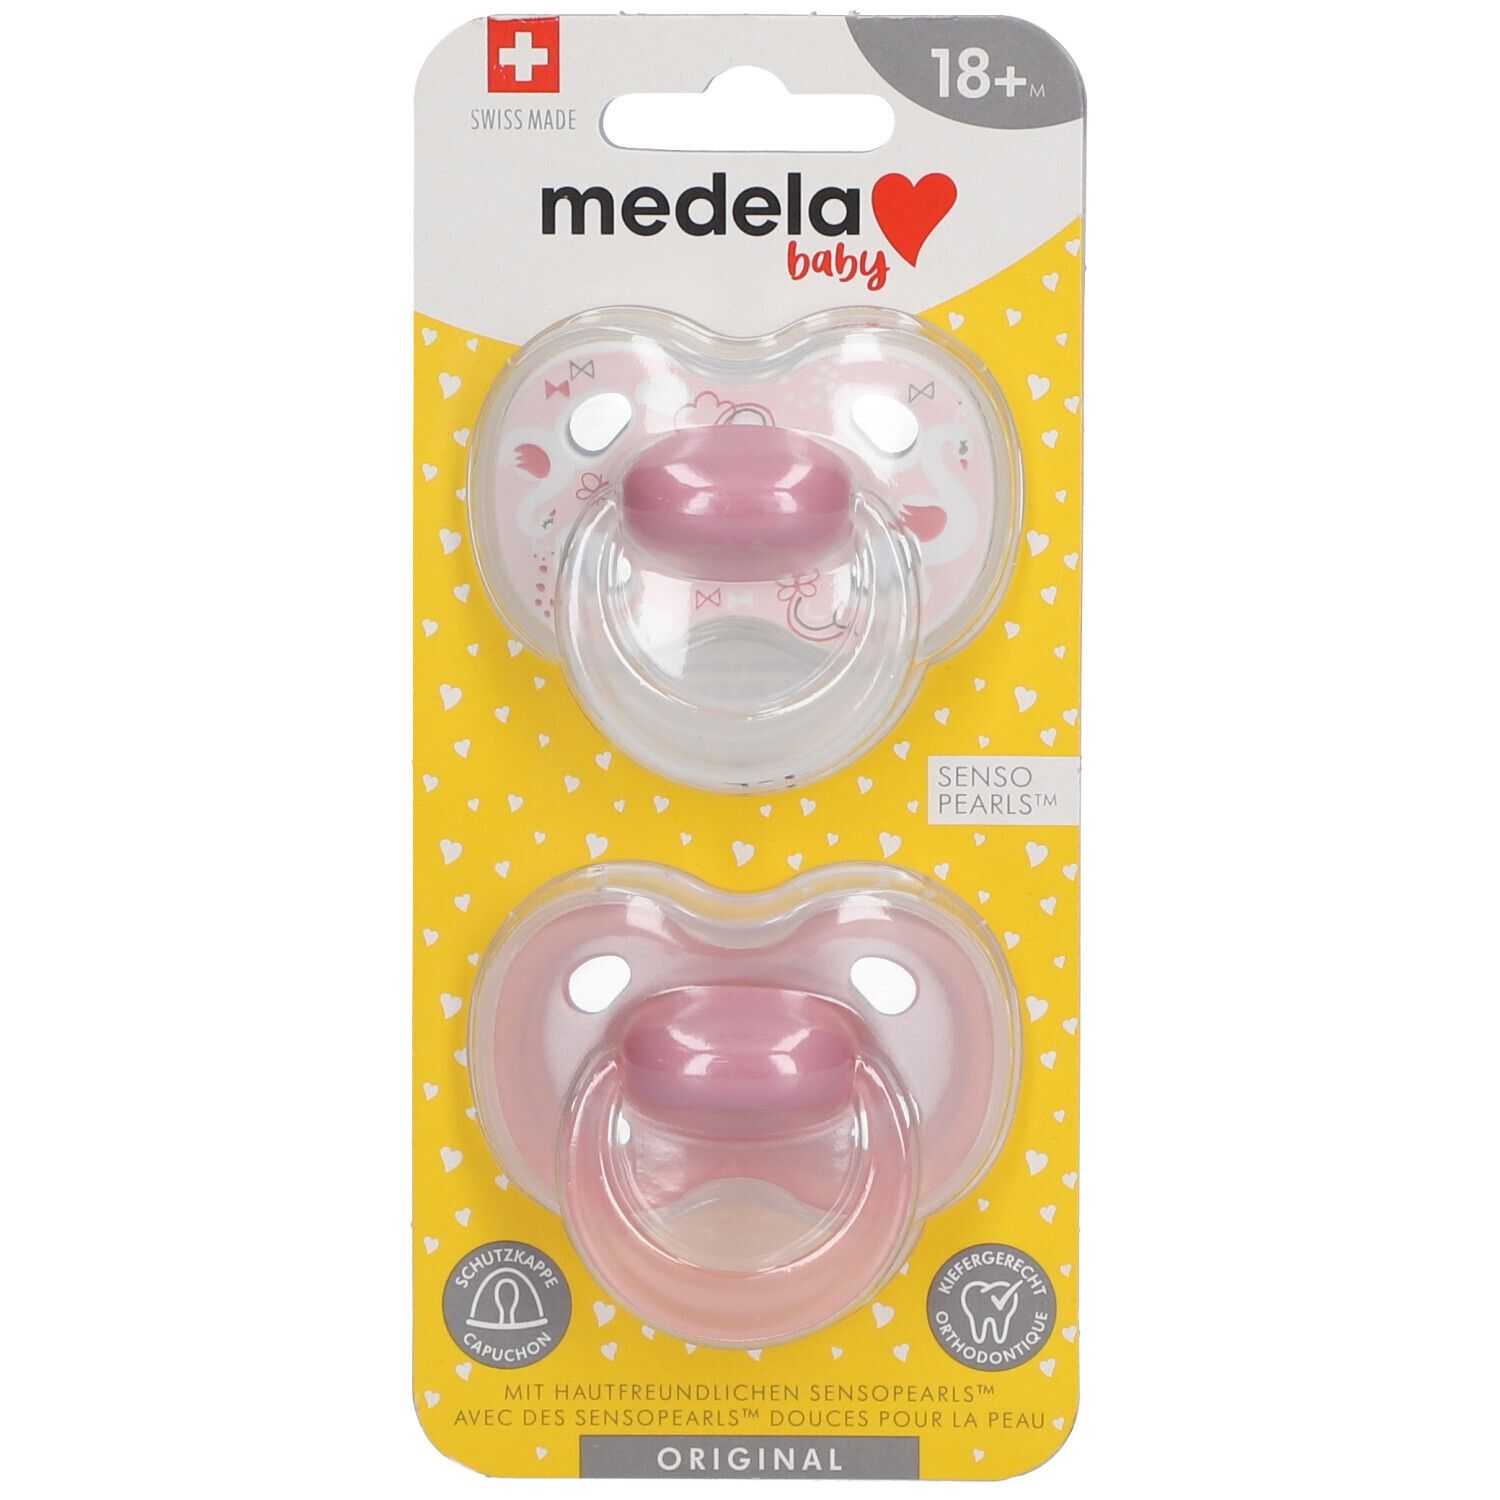 Medela Baby Original Sucette Powdery Pink 18 Mois+ DUO 2 tétine